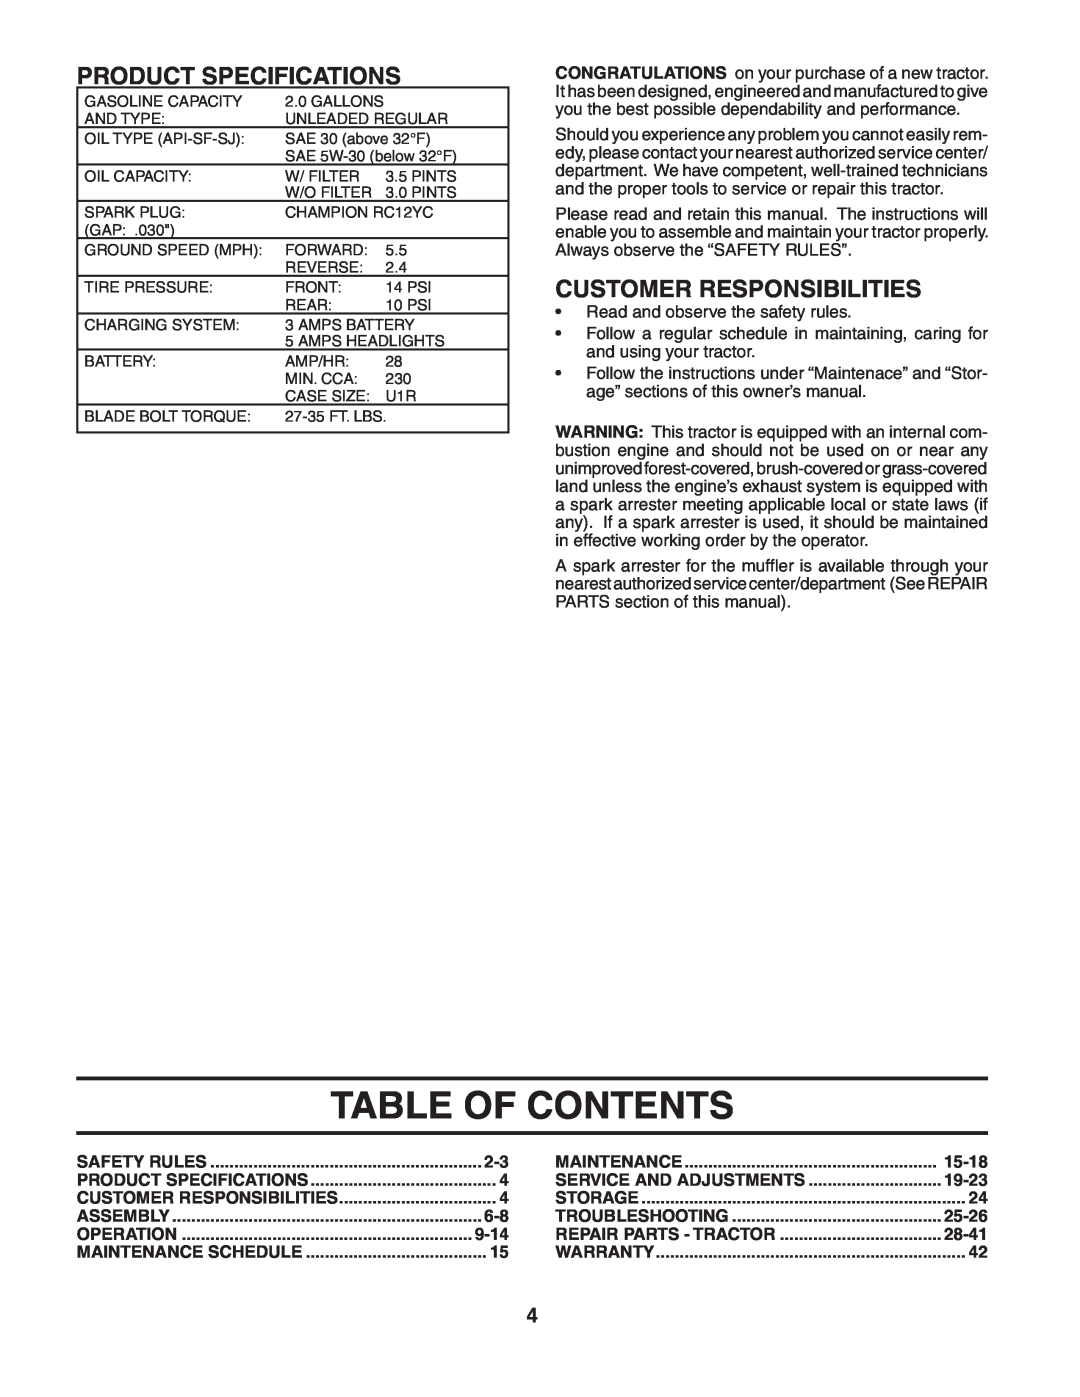 Poulan 190944 owner manual Table Of Contents, Product Specifications, Customer Responsibilities 